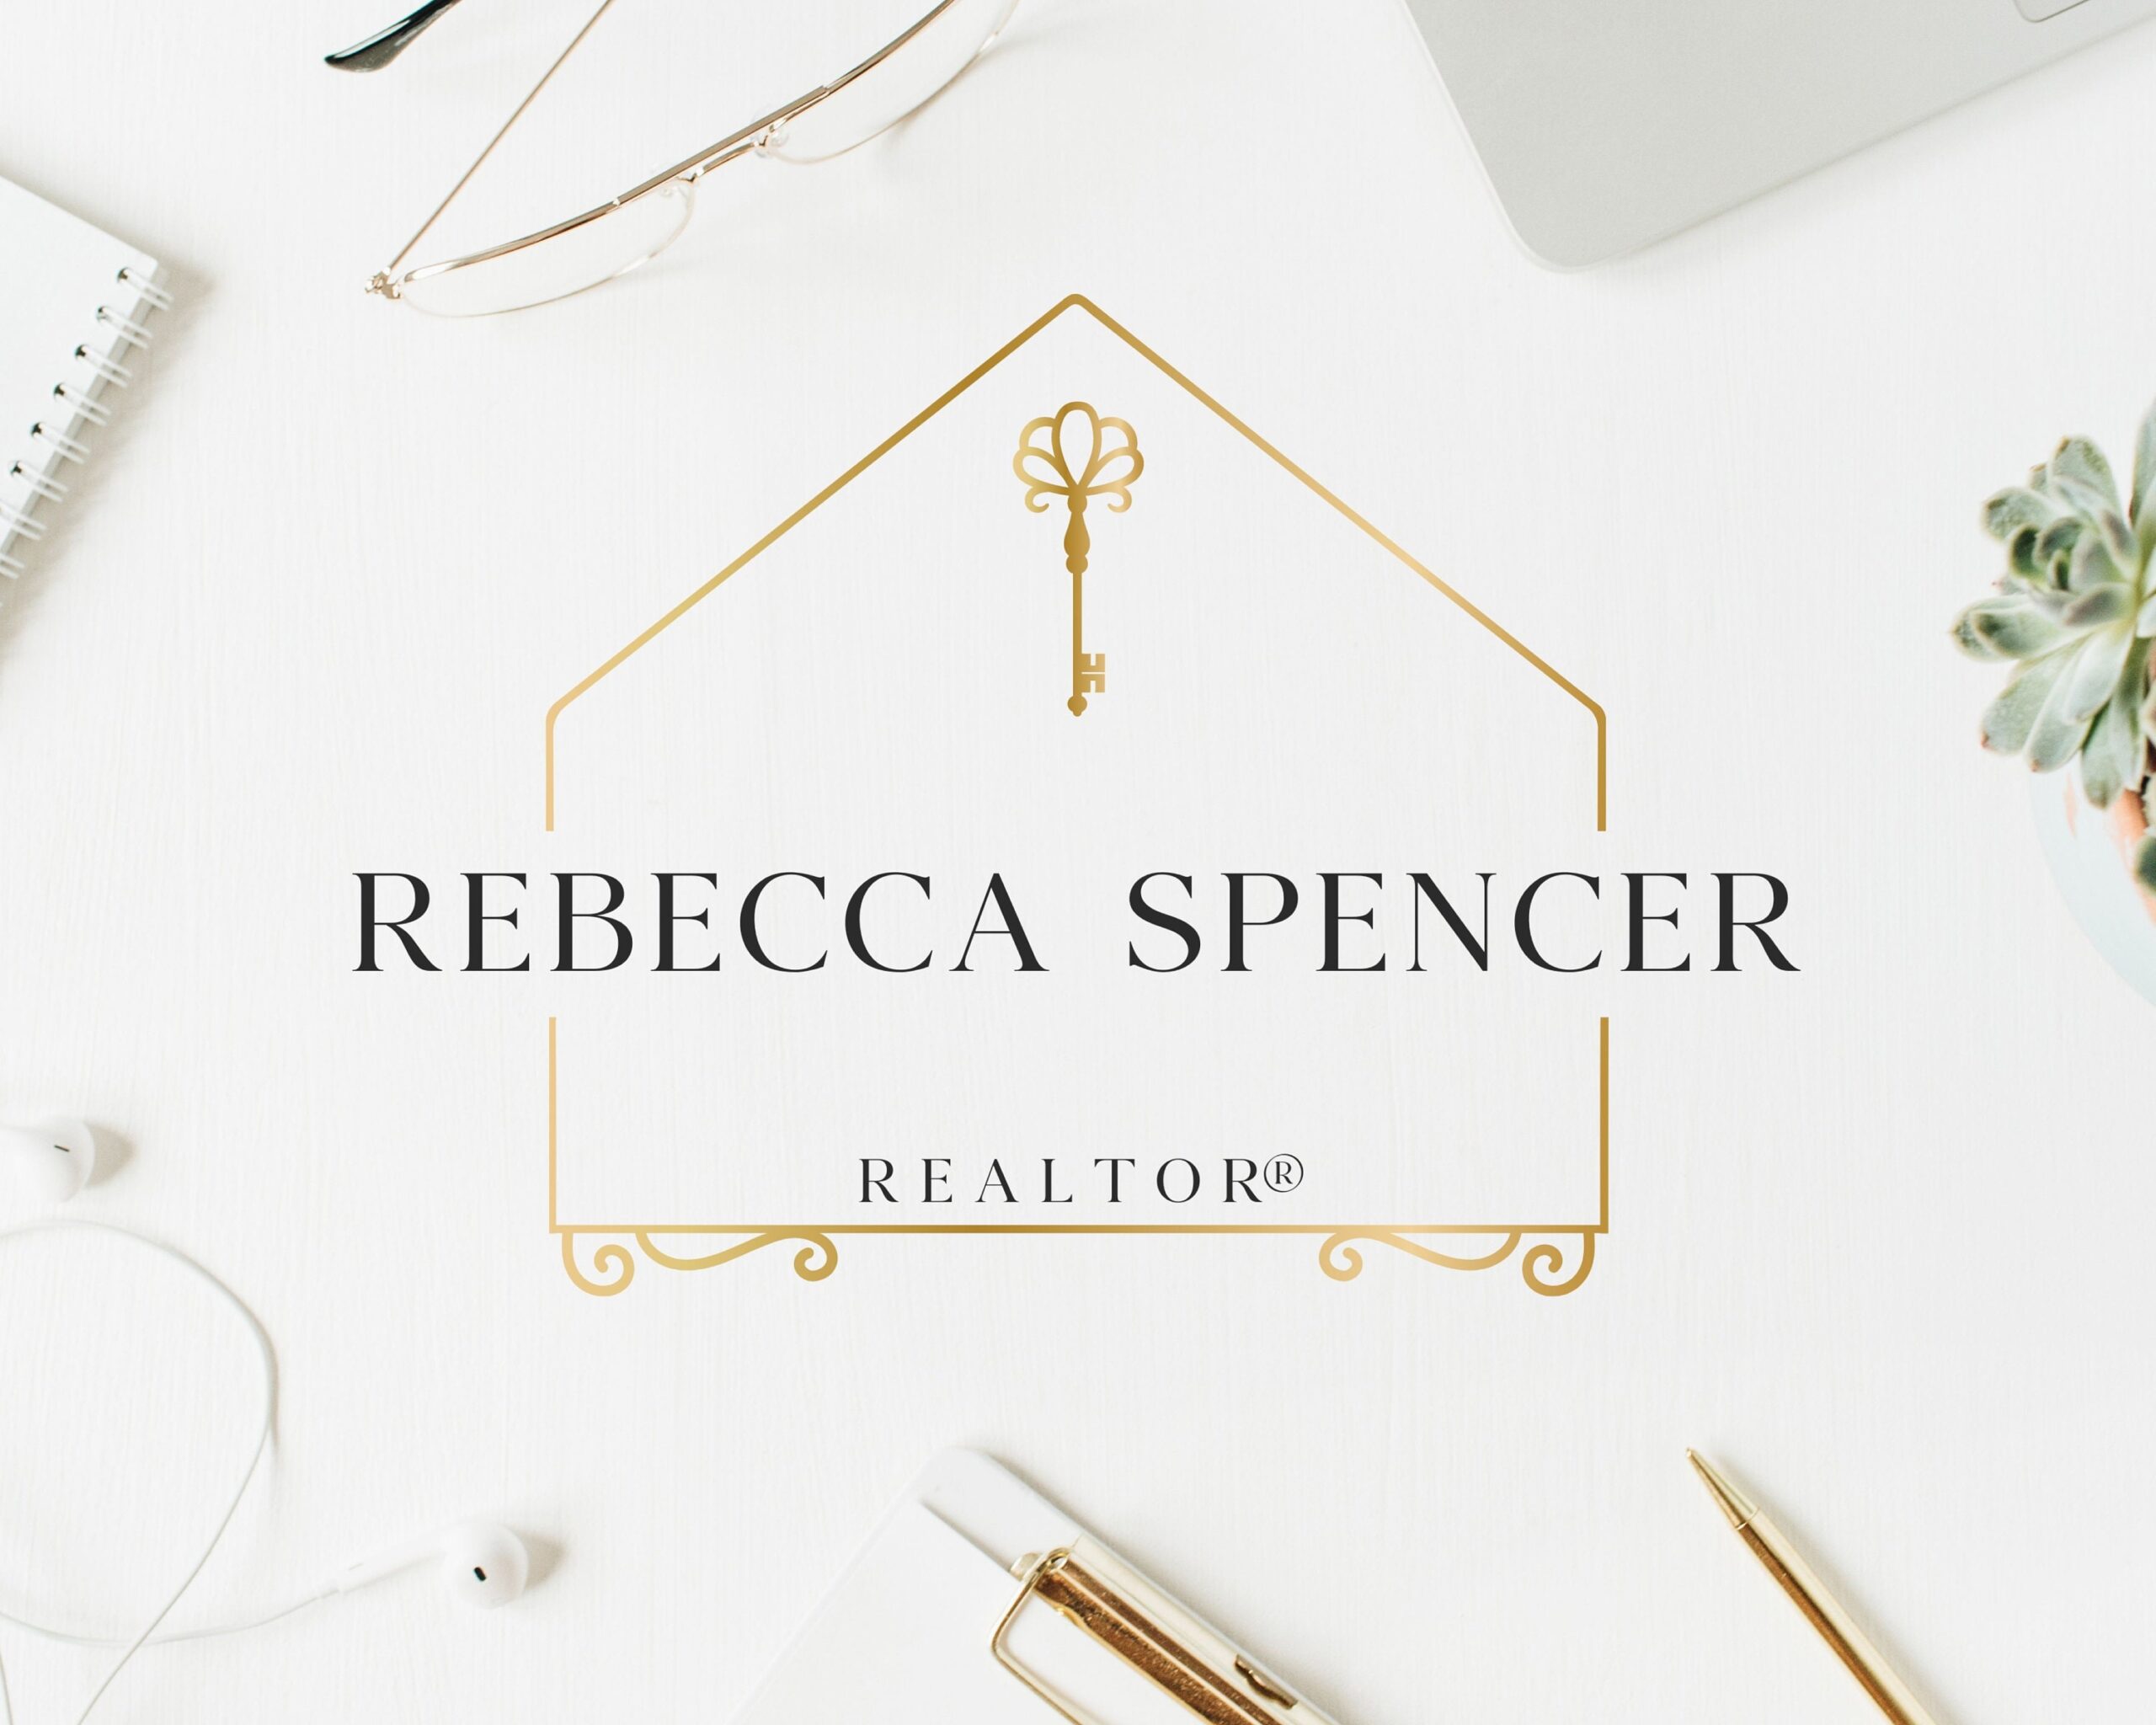 Premade Logo Design for Real Estate Agents - Minimalist Golden Logo -  Sub-Logo and Watermarks - High-Quality Branding for Real Estate Agents